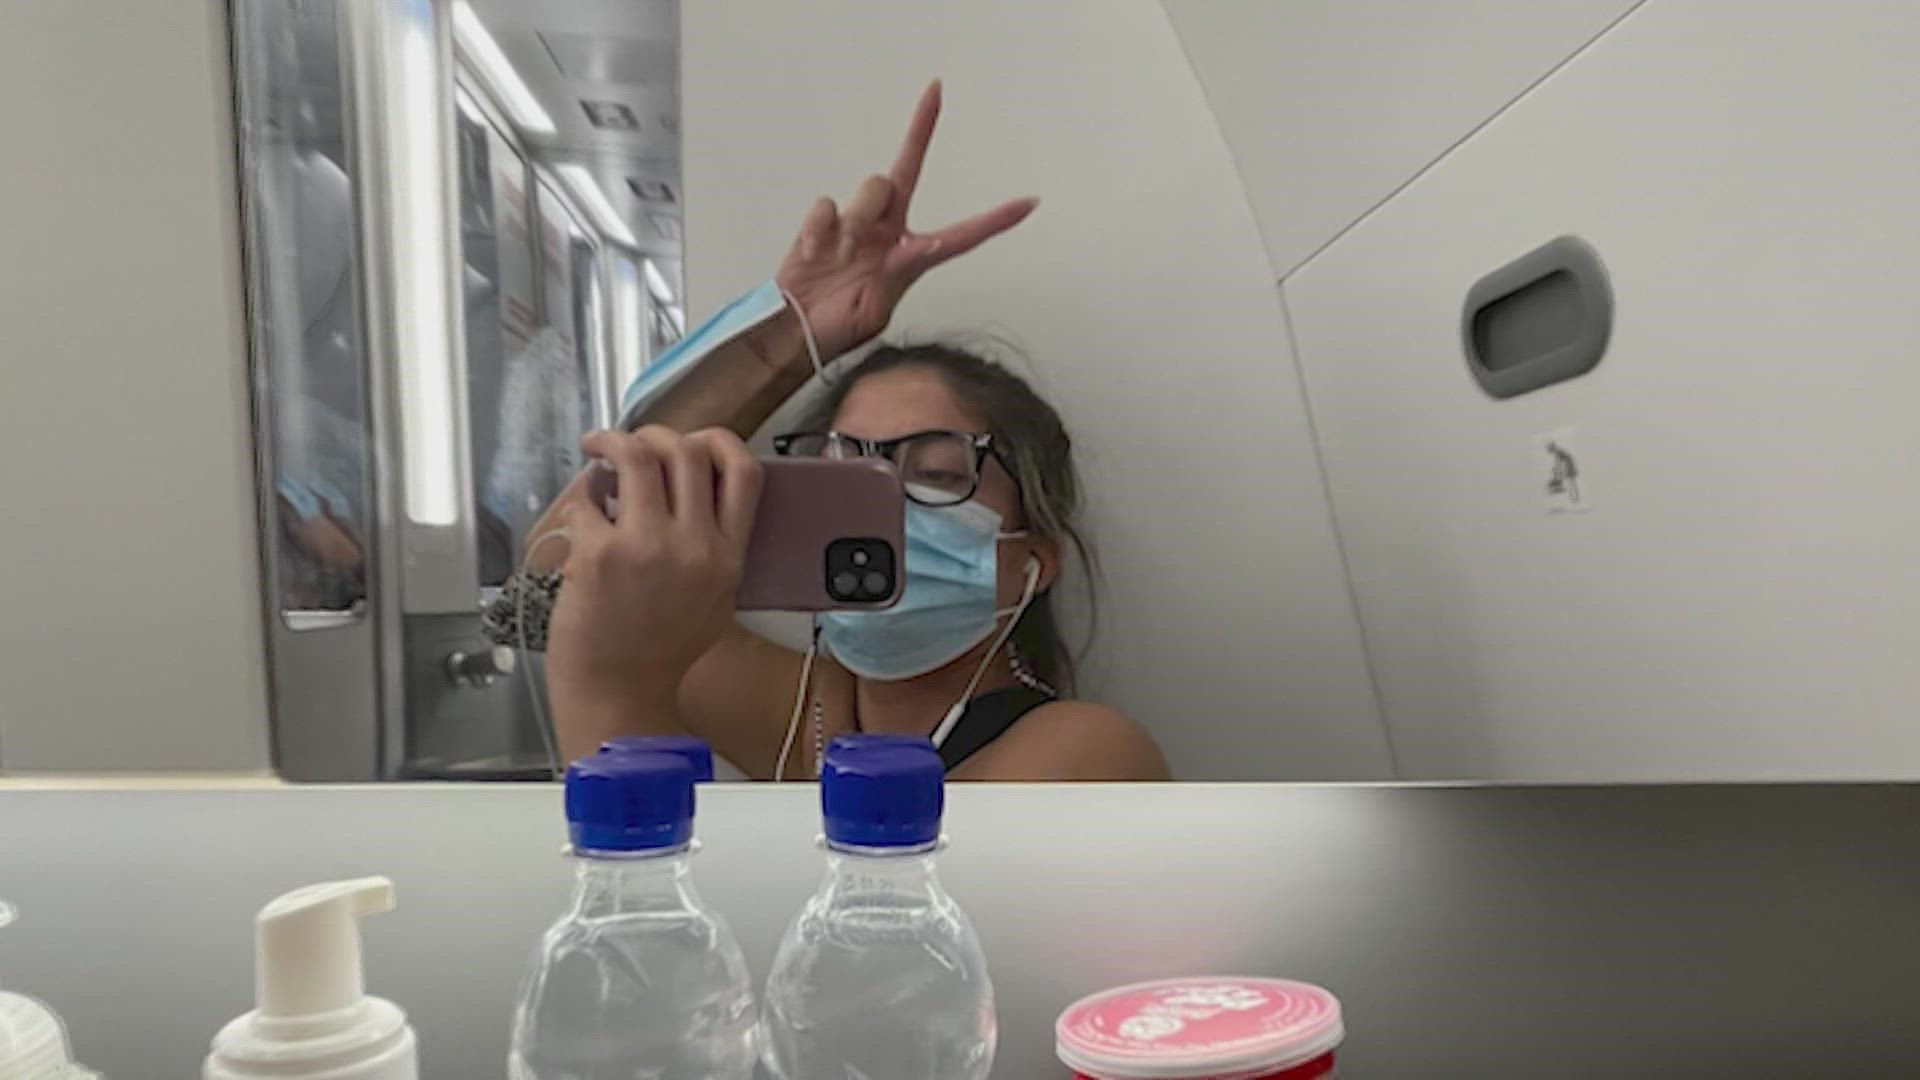 A video of a West Michigan woman in an airplane bathroom is now going viral.